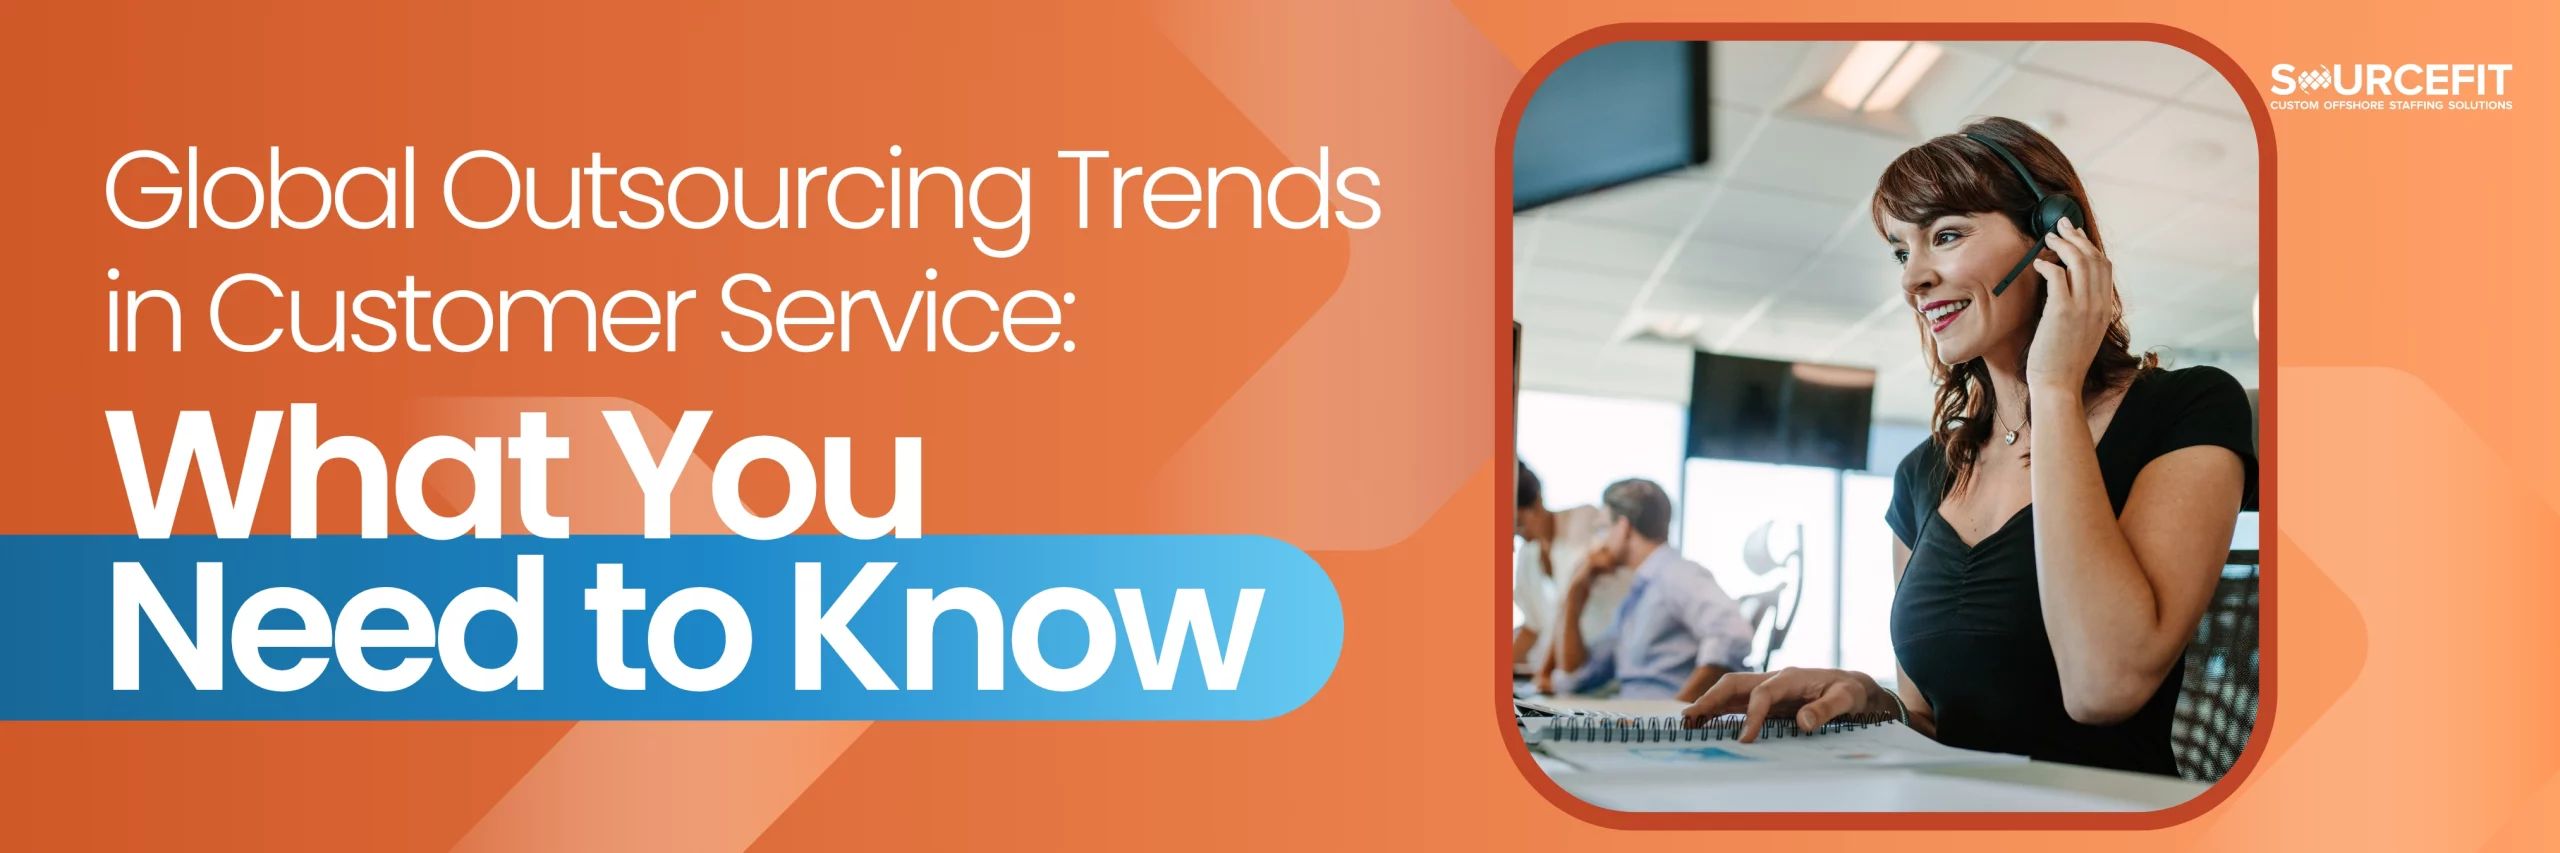 Global Outsourcing Trends in Customer ServiceWhat You Need to Know